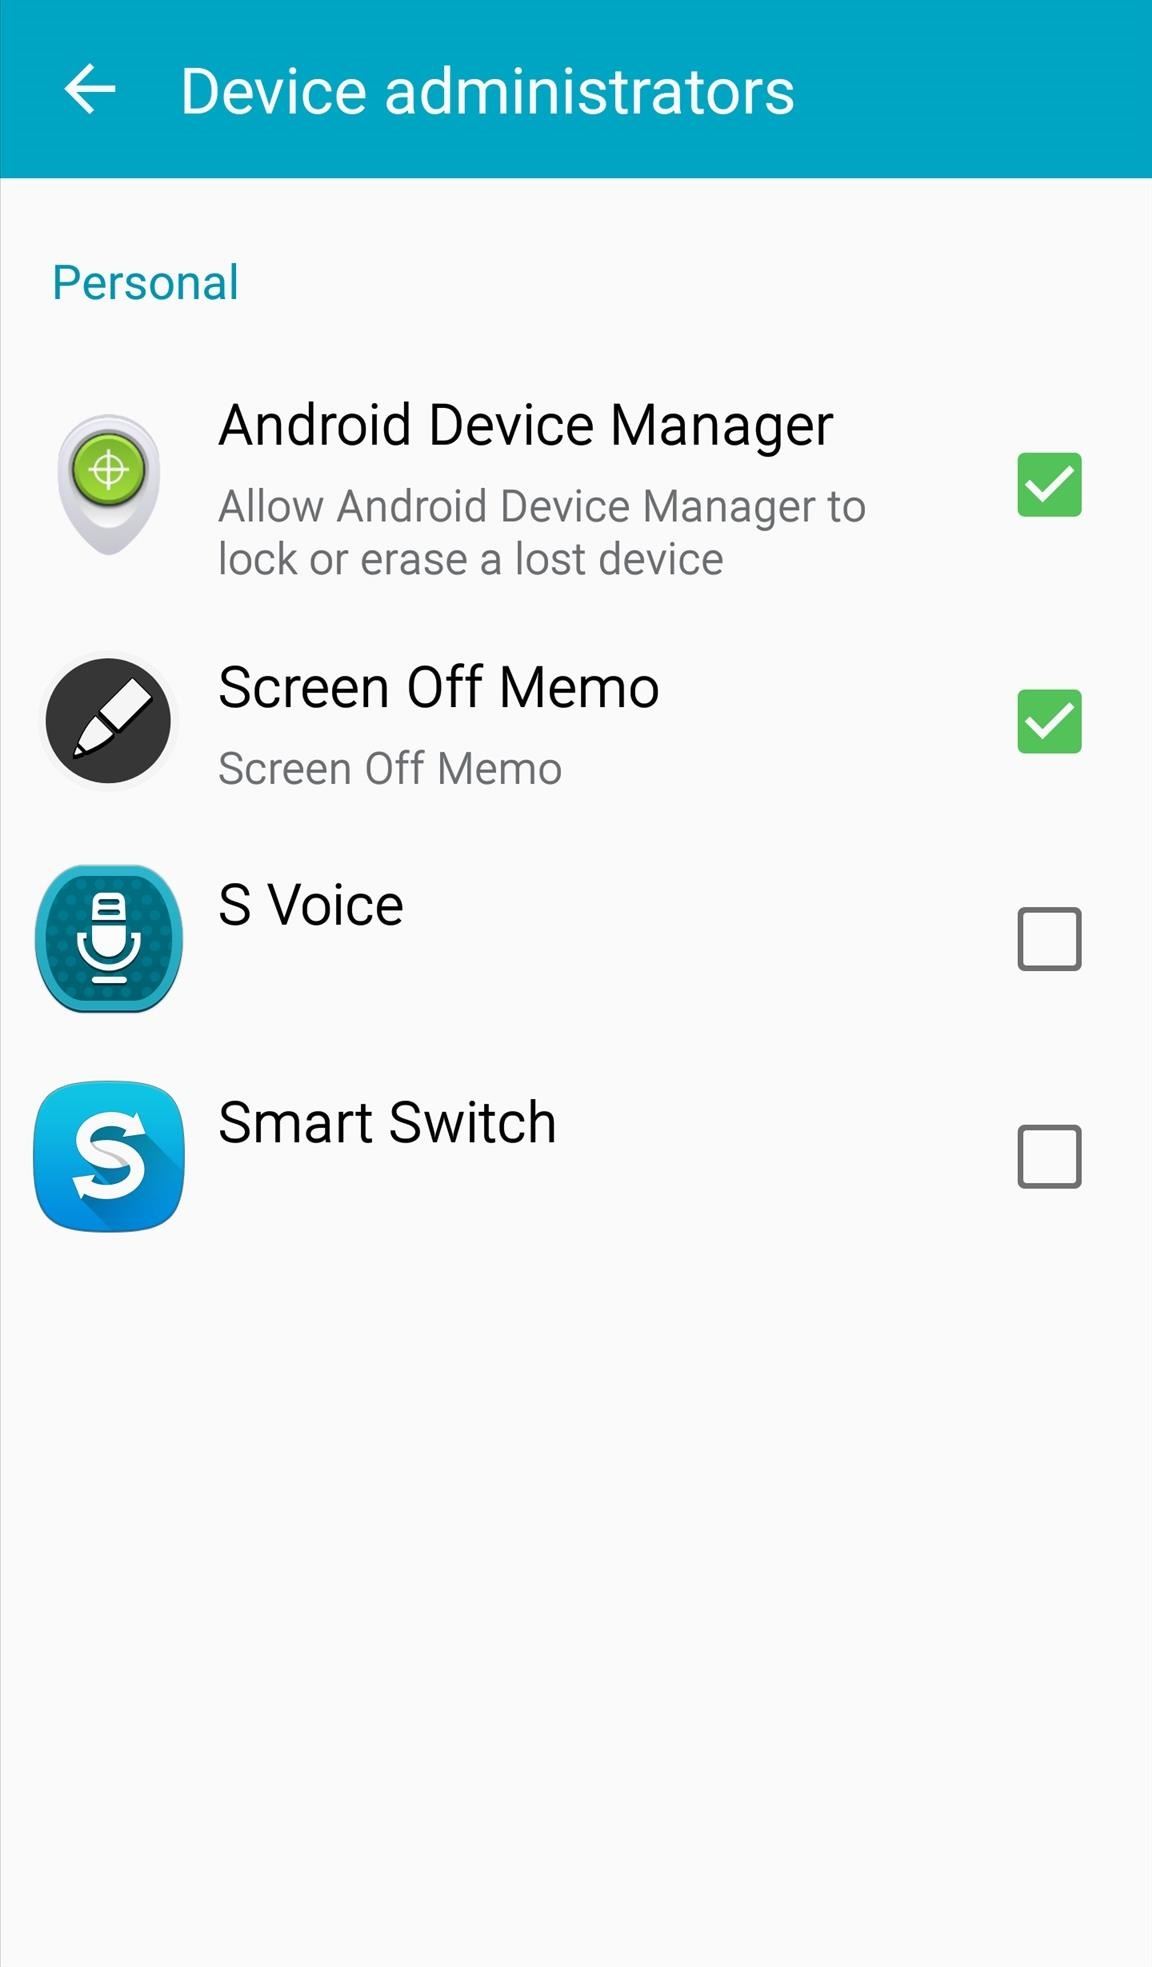 How to Get the Samsung Galaxy Note 5's 'Screen Off Memo' Feature on Older Note Devices